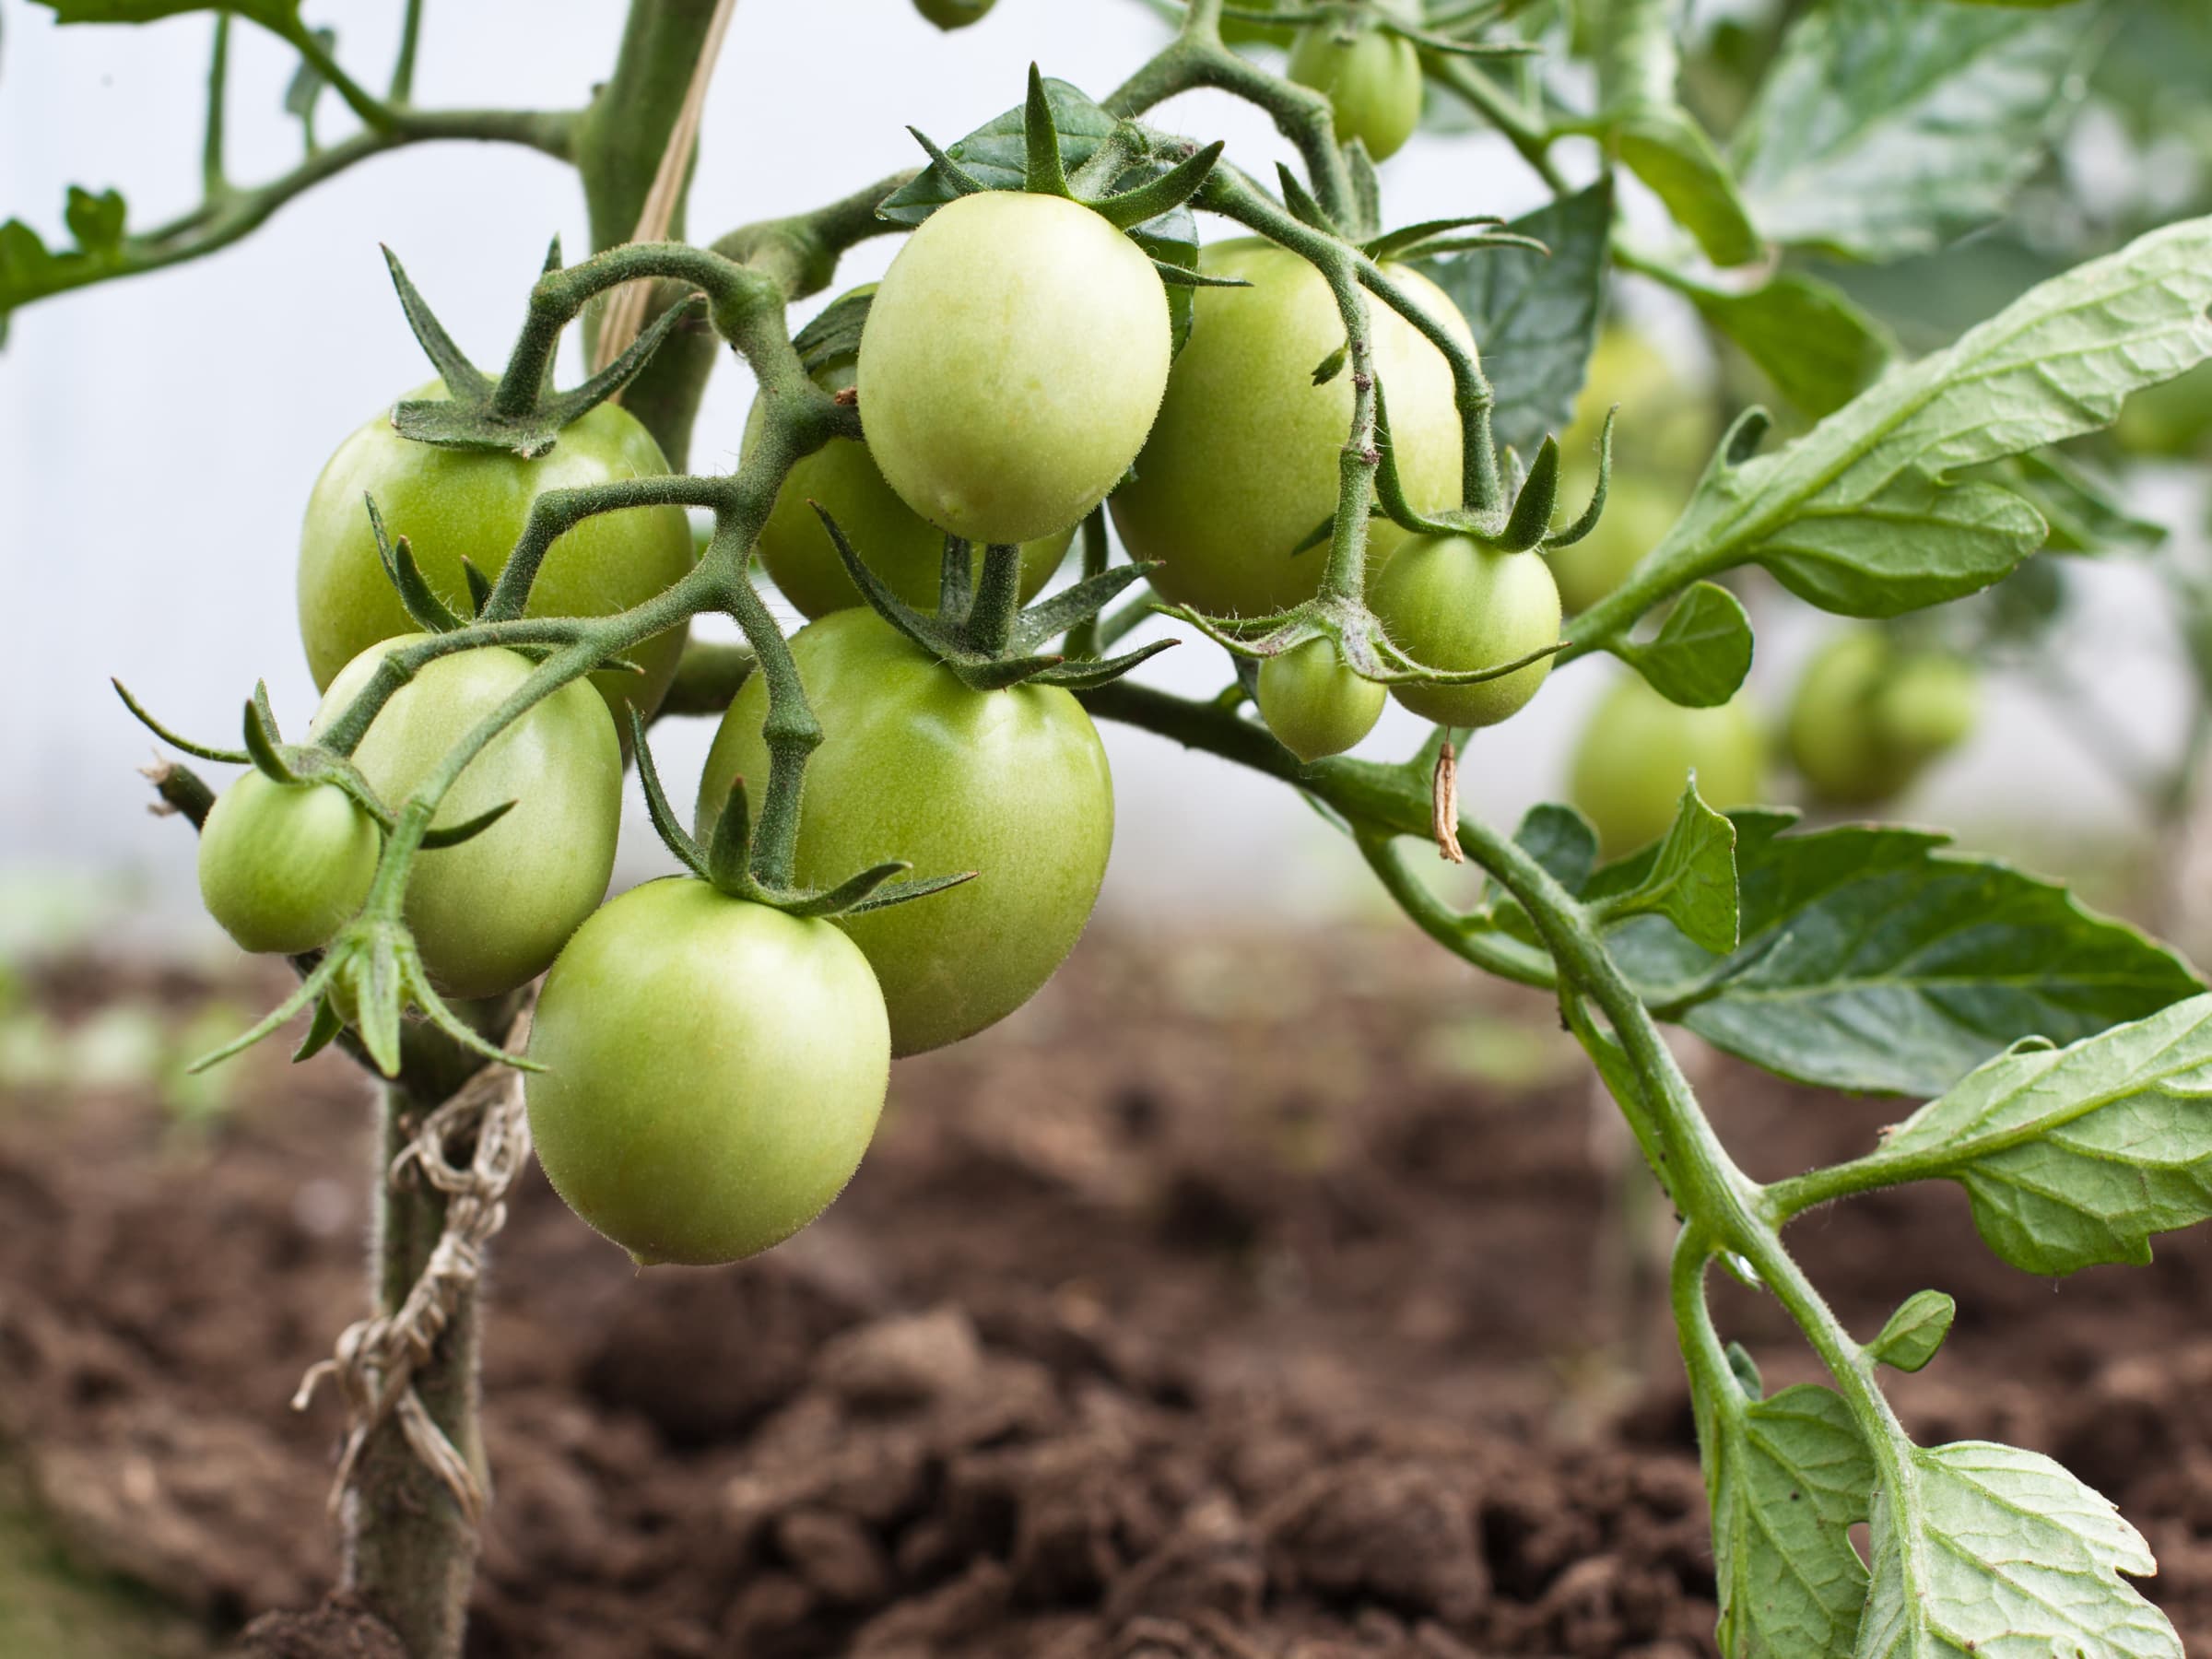 Image of green tomatoes on the vine.